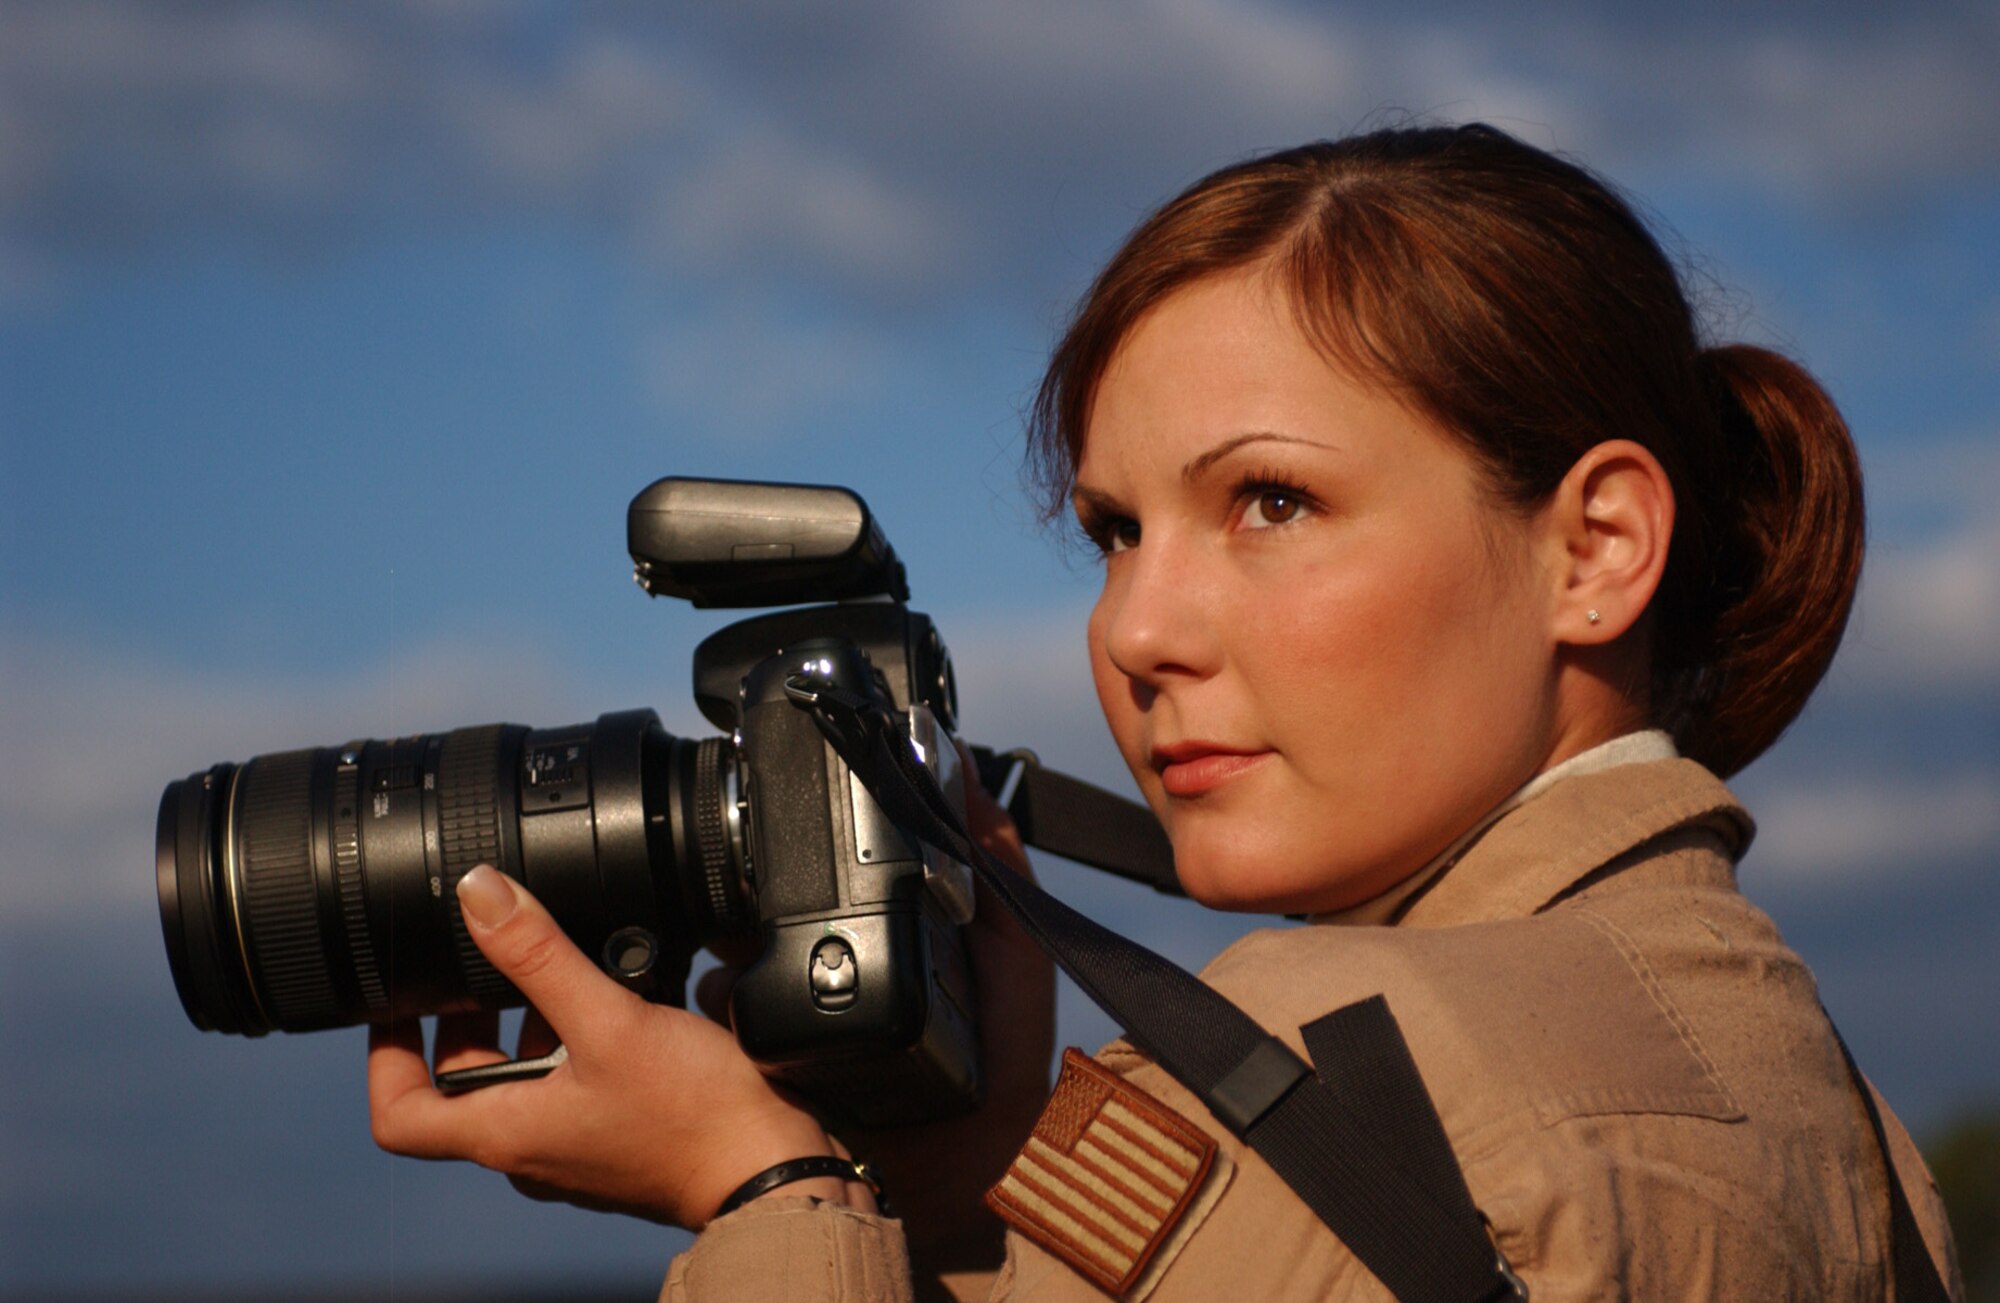 Staff Sgt. Stacy Pearsall was named the 2007 Military Photographer of the Year out more than 1,700 submissions from other photographers. Sergeant Pearsall is an aerial photographer with the 1st Combat Camera Squadron here. (U.S. Air Force photo/Staff Sgt. Bethann Caporaletti)